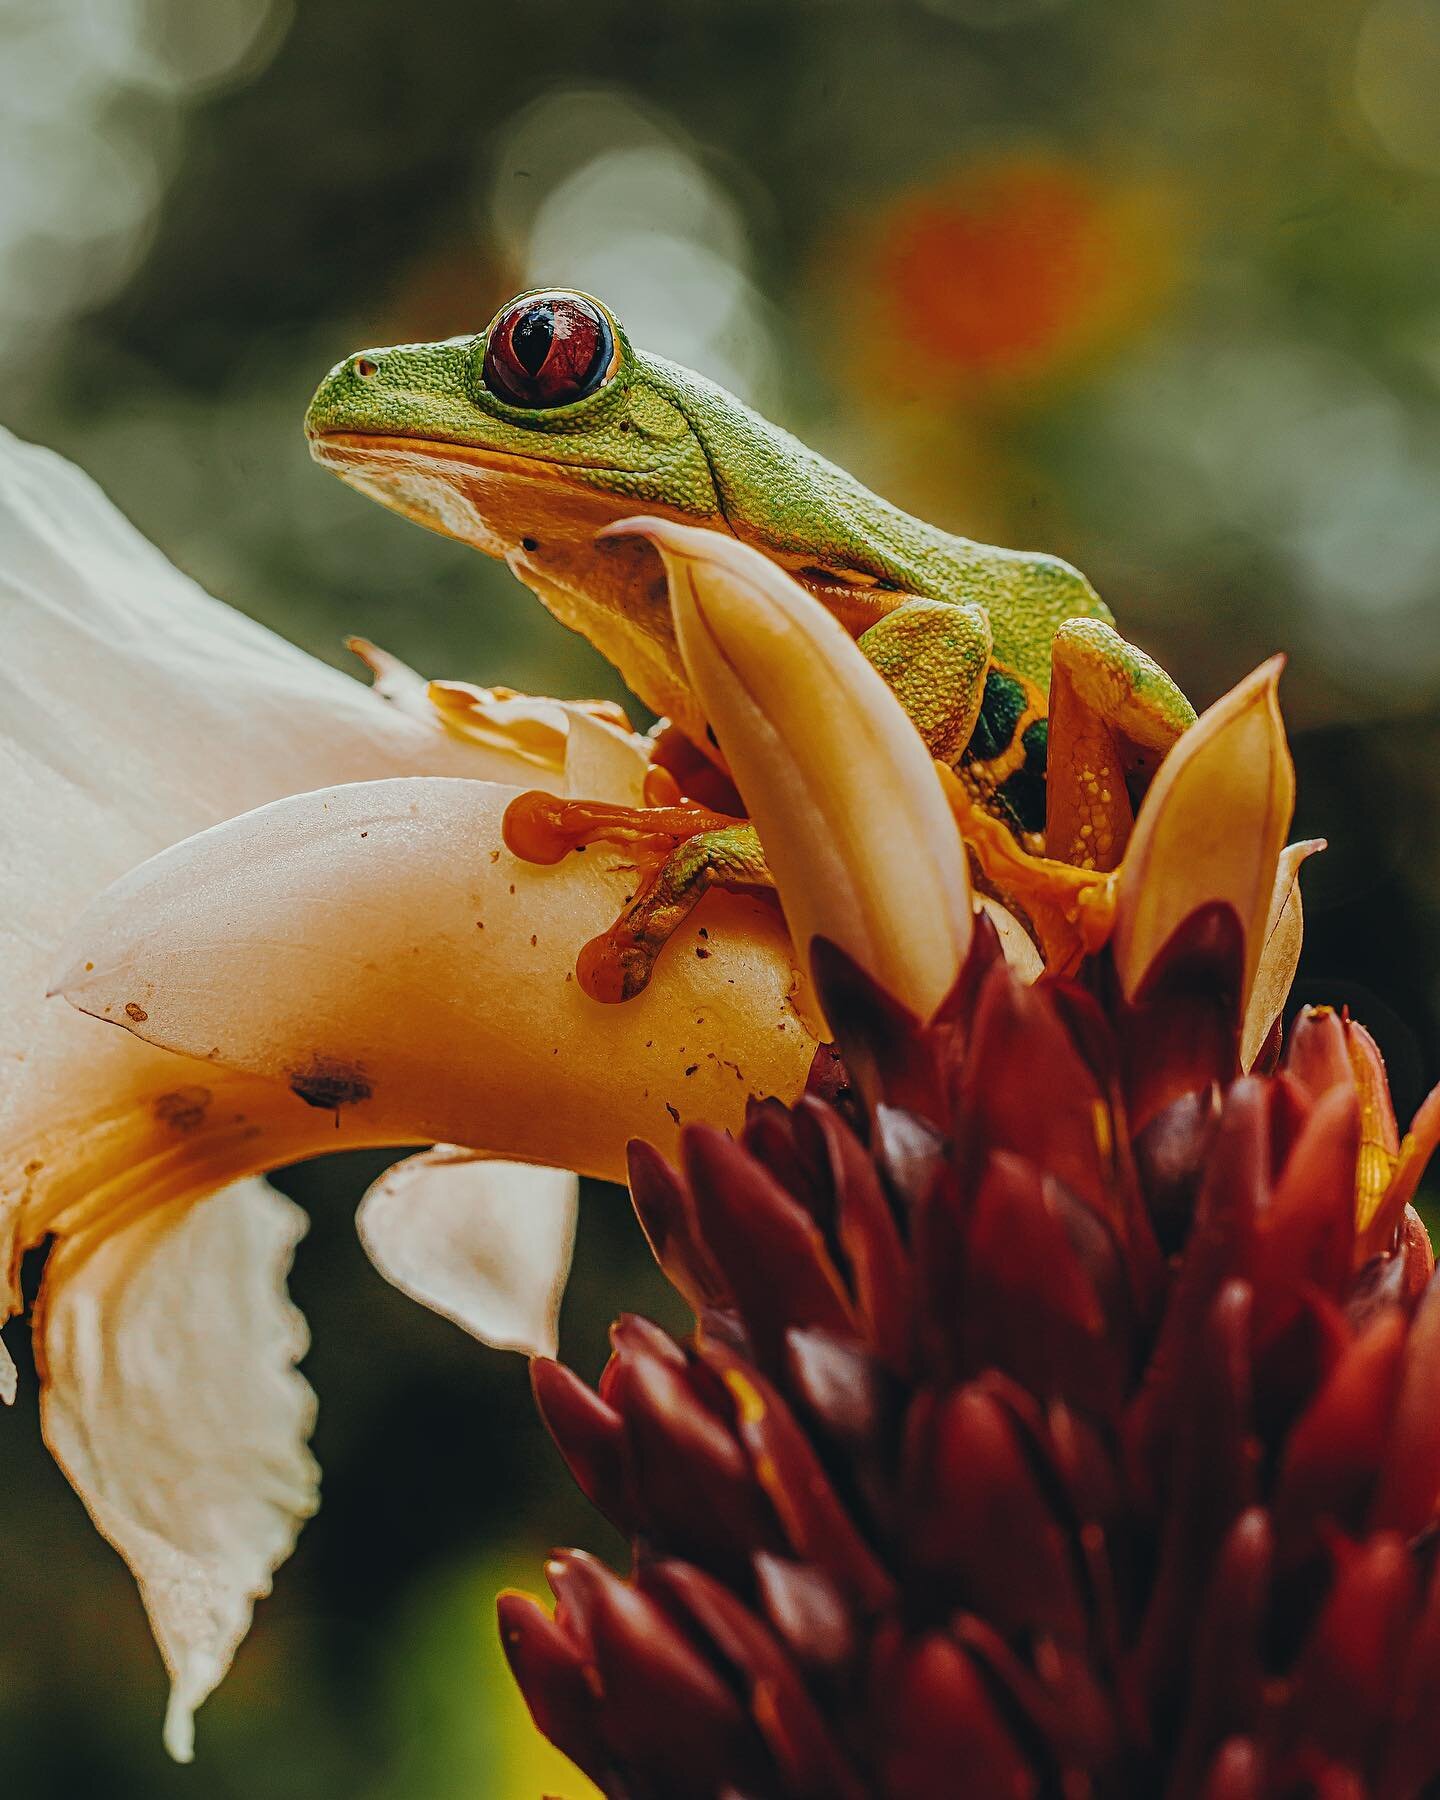 The red-eyed tree frog, with its vibrant hues and striking crimson eyes, has long captured the imagination of those seeking spiritual symbolism in the natural world. Inhabiting the lush rainforests of Central and South America, this creature is often